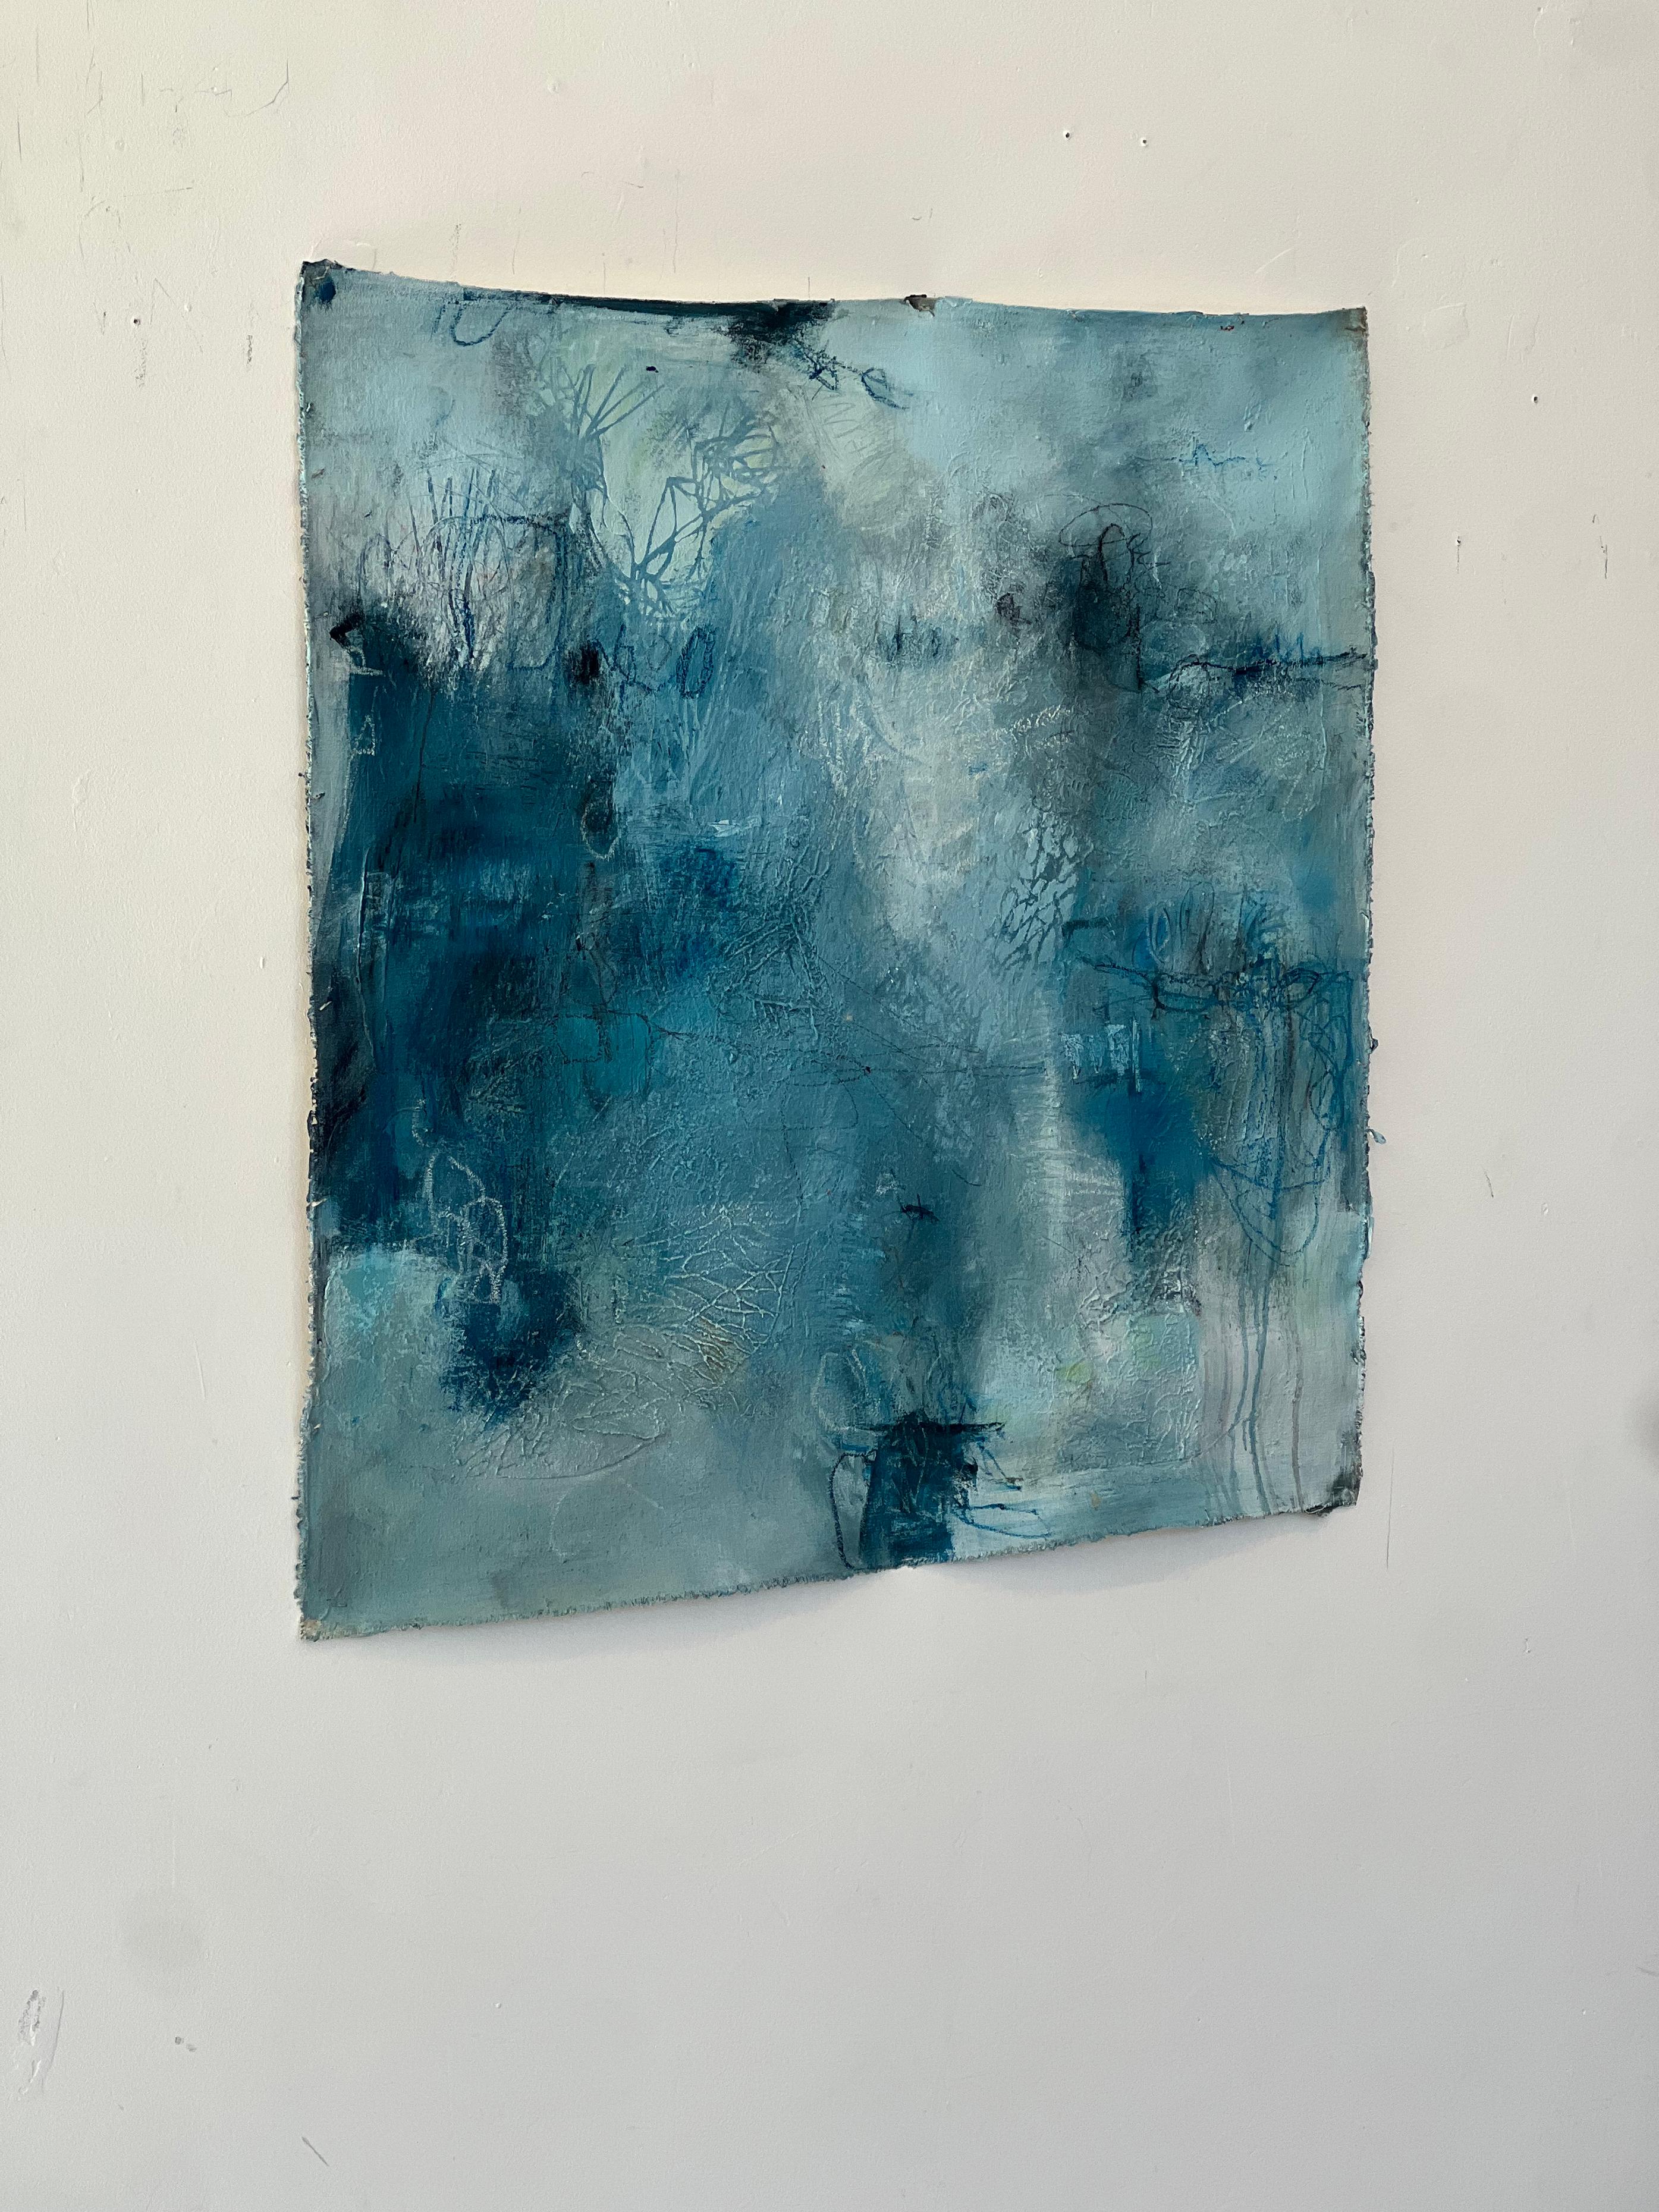 Water and Light: Becoming - acrylic on canvas - Blue Abstract Painting by Stephanie Visser 